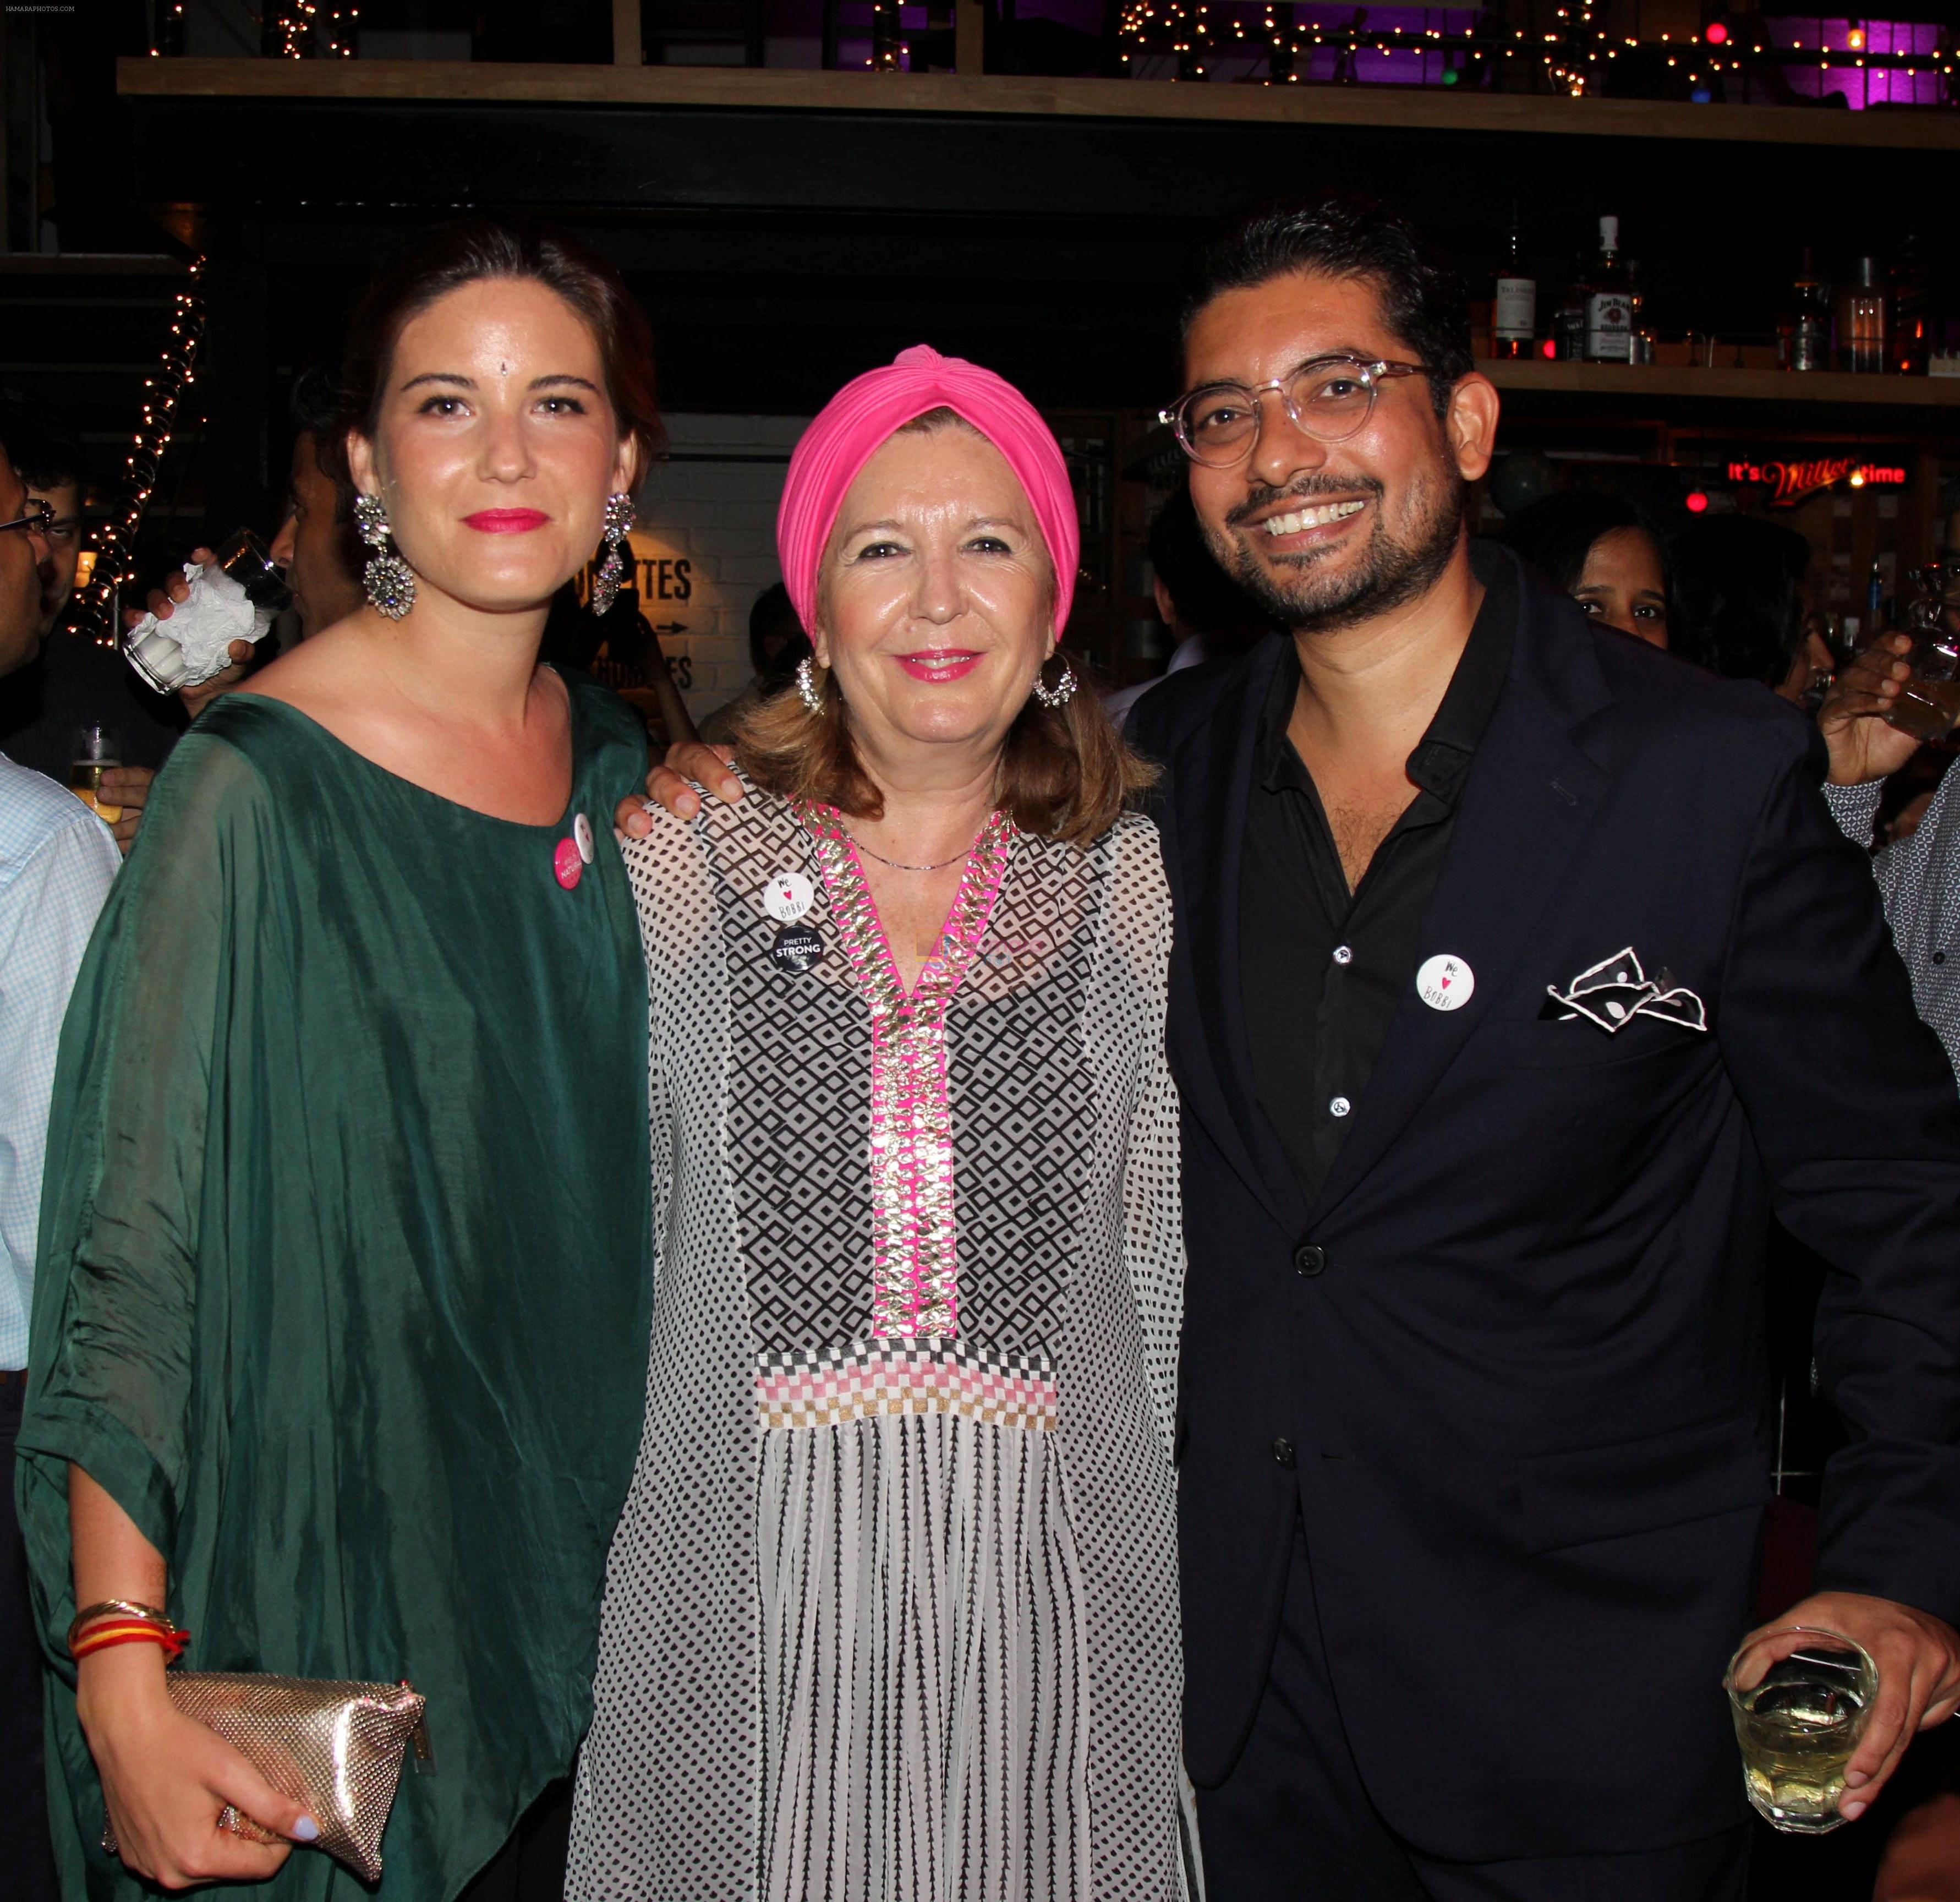 Marta Prieto, VP & GM Bobbi Brown Cosmetics - India, Africa, Middle East and Europe and Rohan Vaziralli, Country Manager Estee Lauder Companies India at the Bobbi Brown Mumbai Launch Party